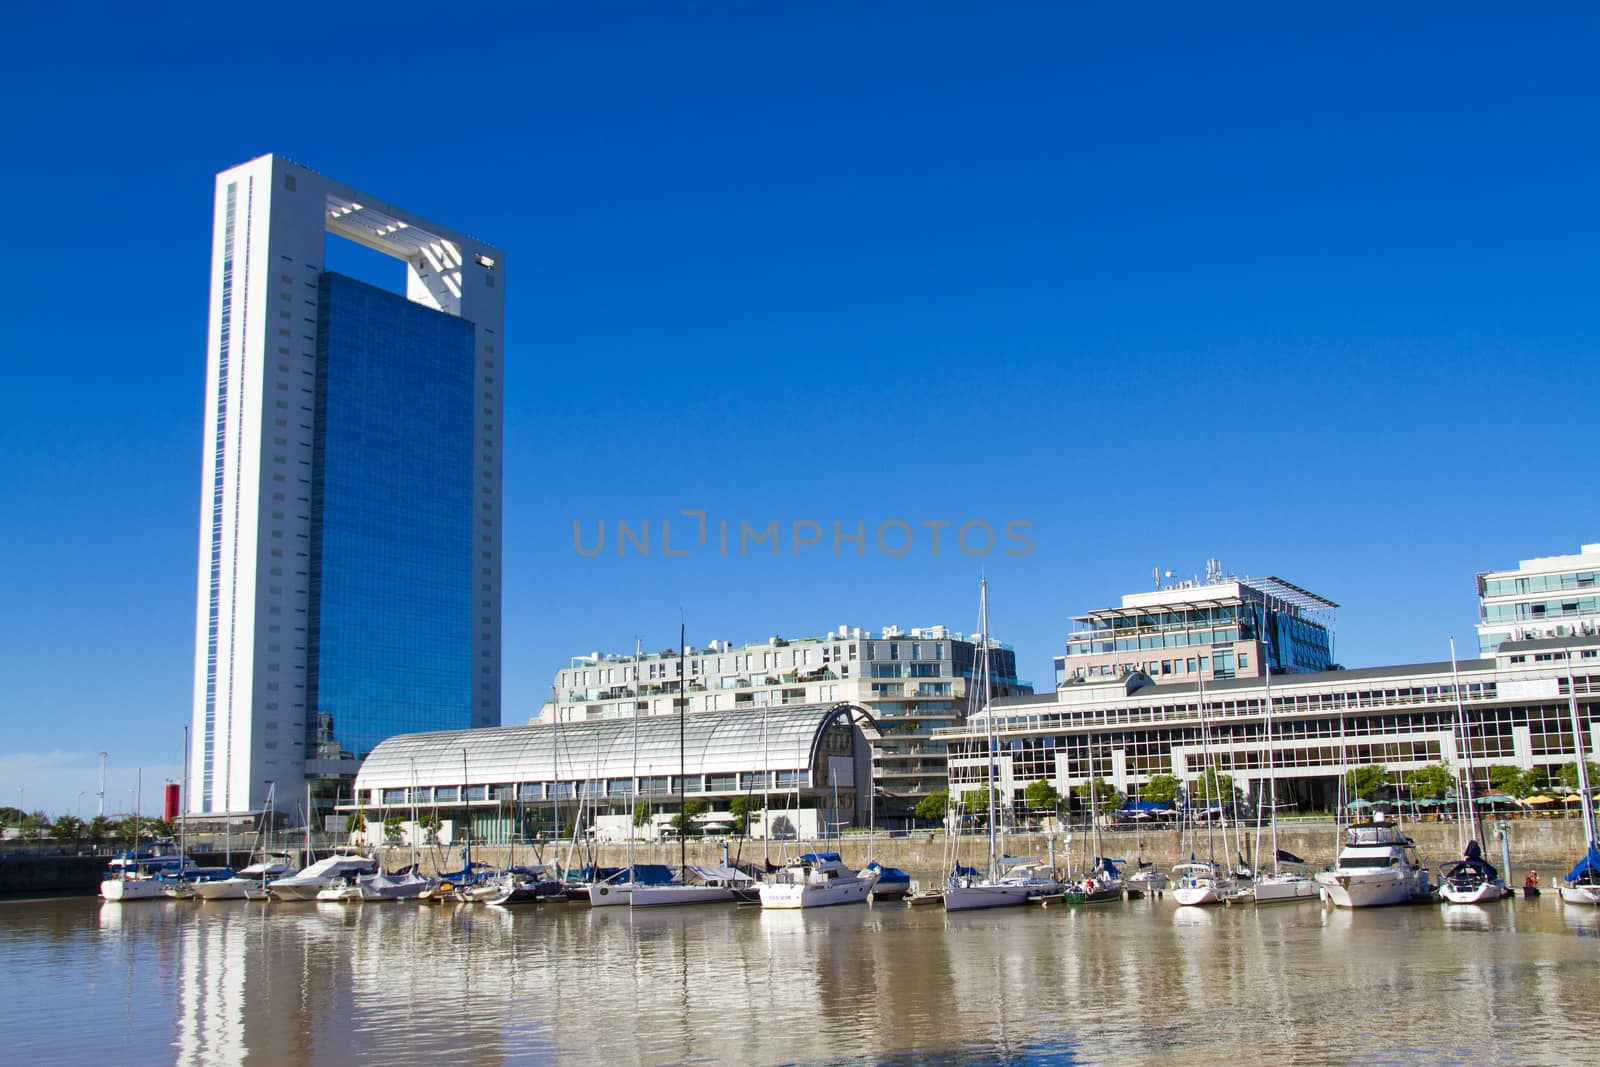 Office buildings and sailboats in harbor of Puerto Madero in Buenos Aires.